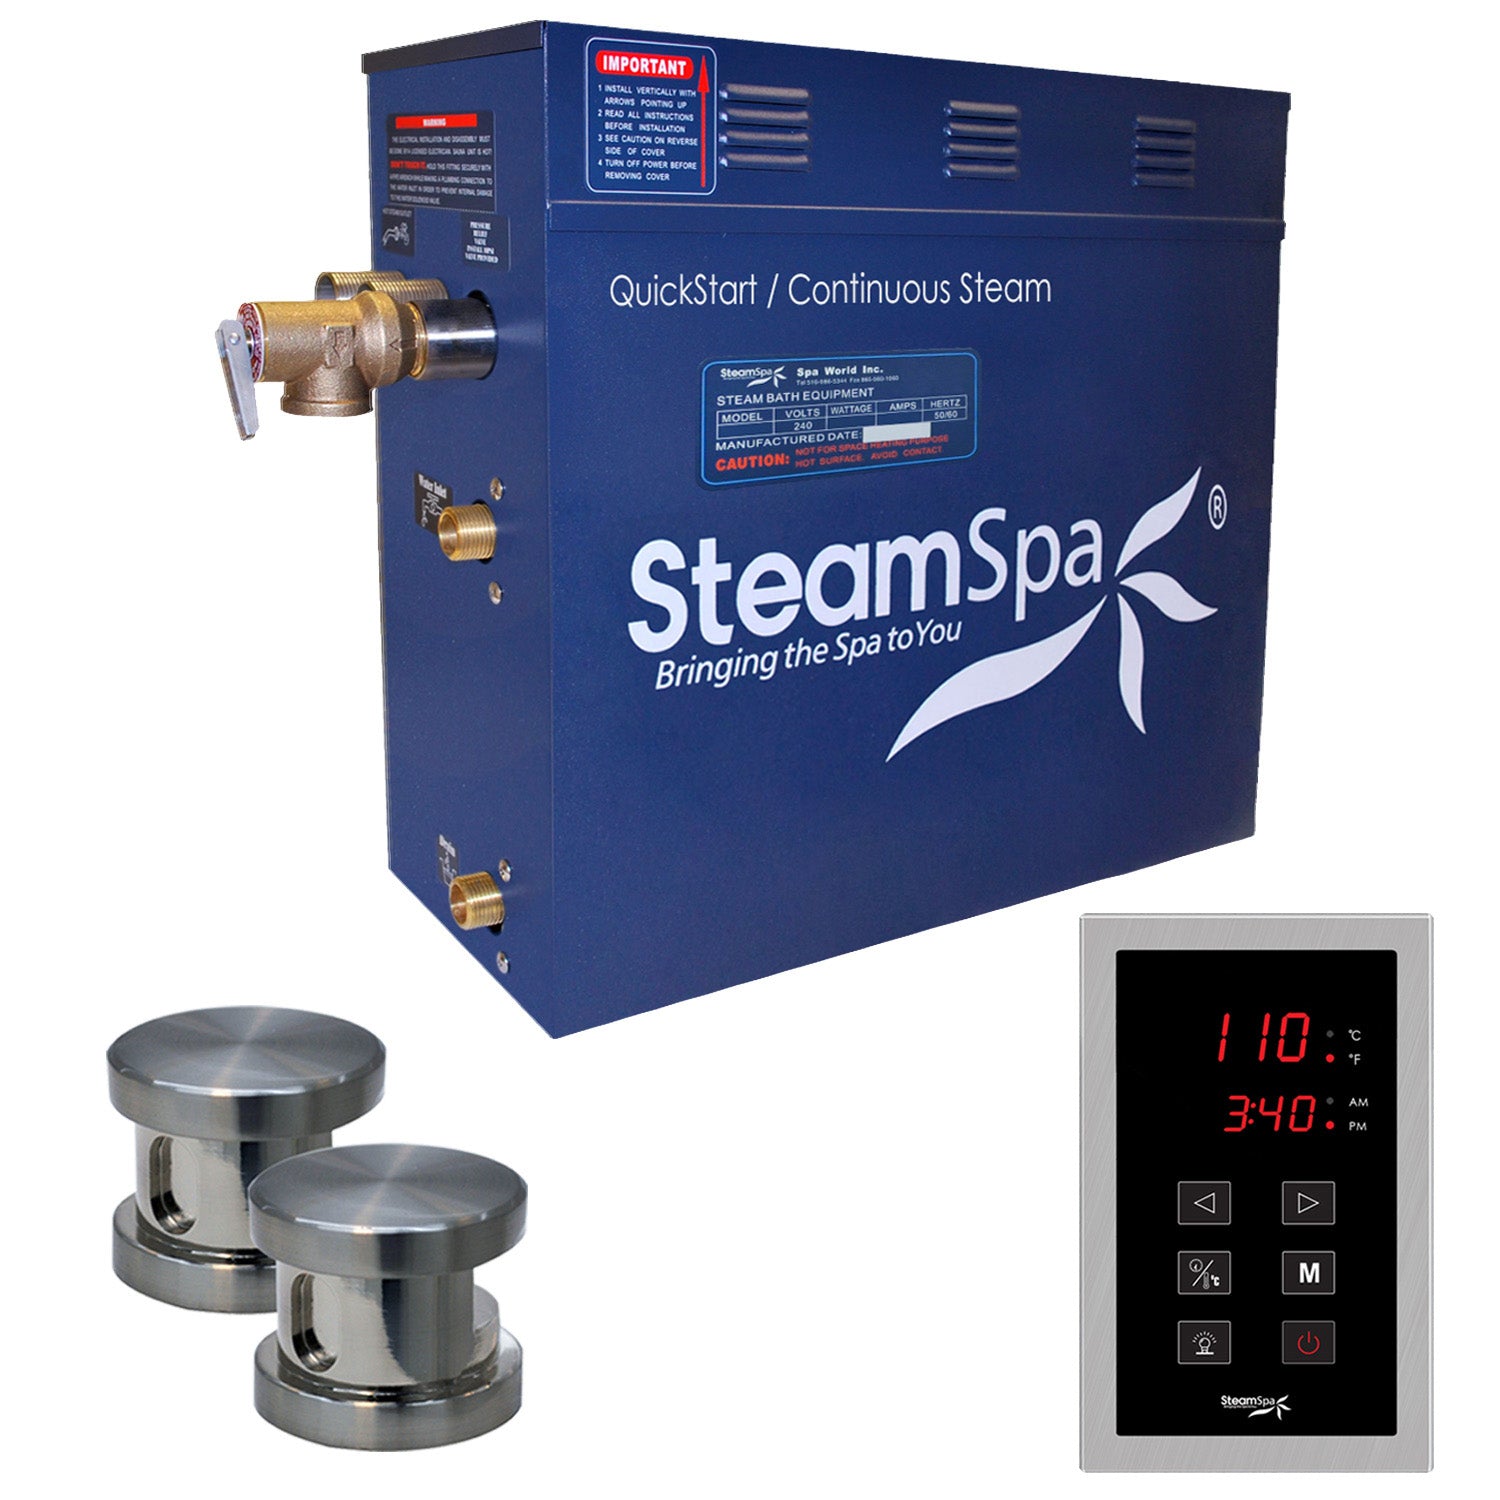 SteamSpa Oasis 10.5 KW QuickStart Acu-Steam Bath Generator Package - 9.5 in. L x 17 in. W x 15 in. - Stainless Steel - Brushed Nickel - Includes a 10.5kW QuickStart Acu-Steam Bath Generator, Touch Pad Control Panel, Two Steam heads, Pressure Relief Valve - OAT1050 - Vital Hydrotherapy